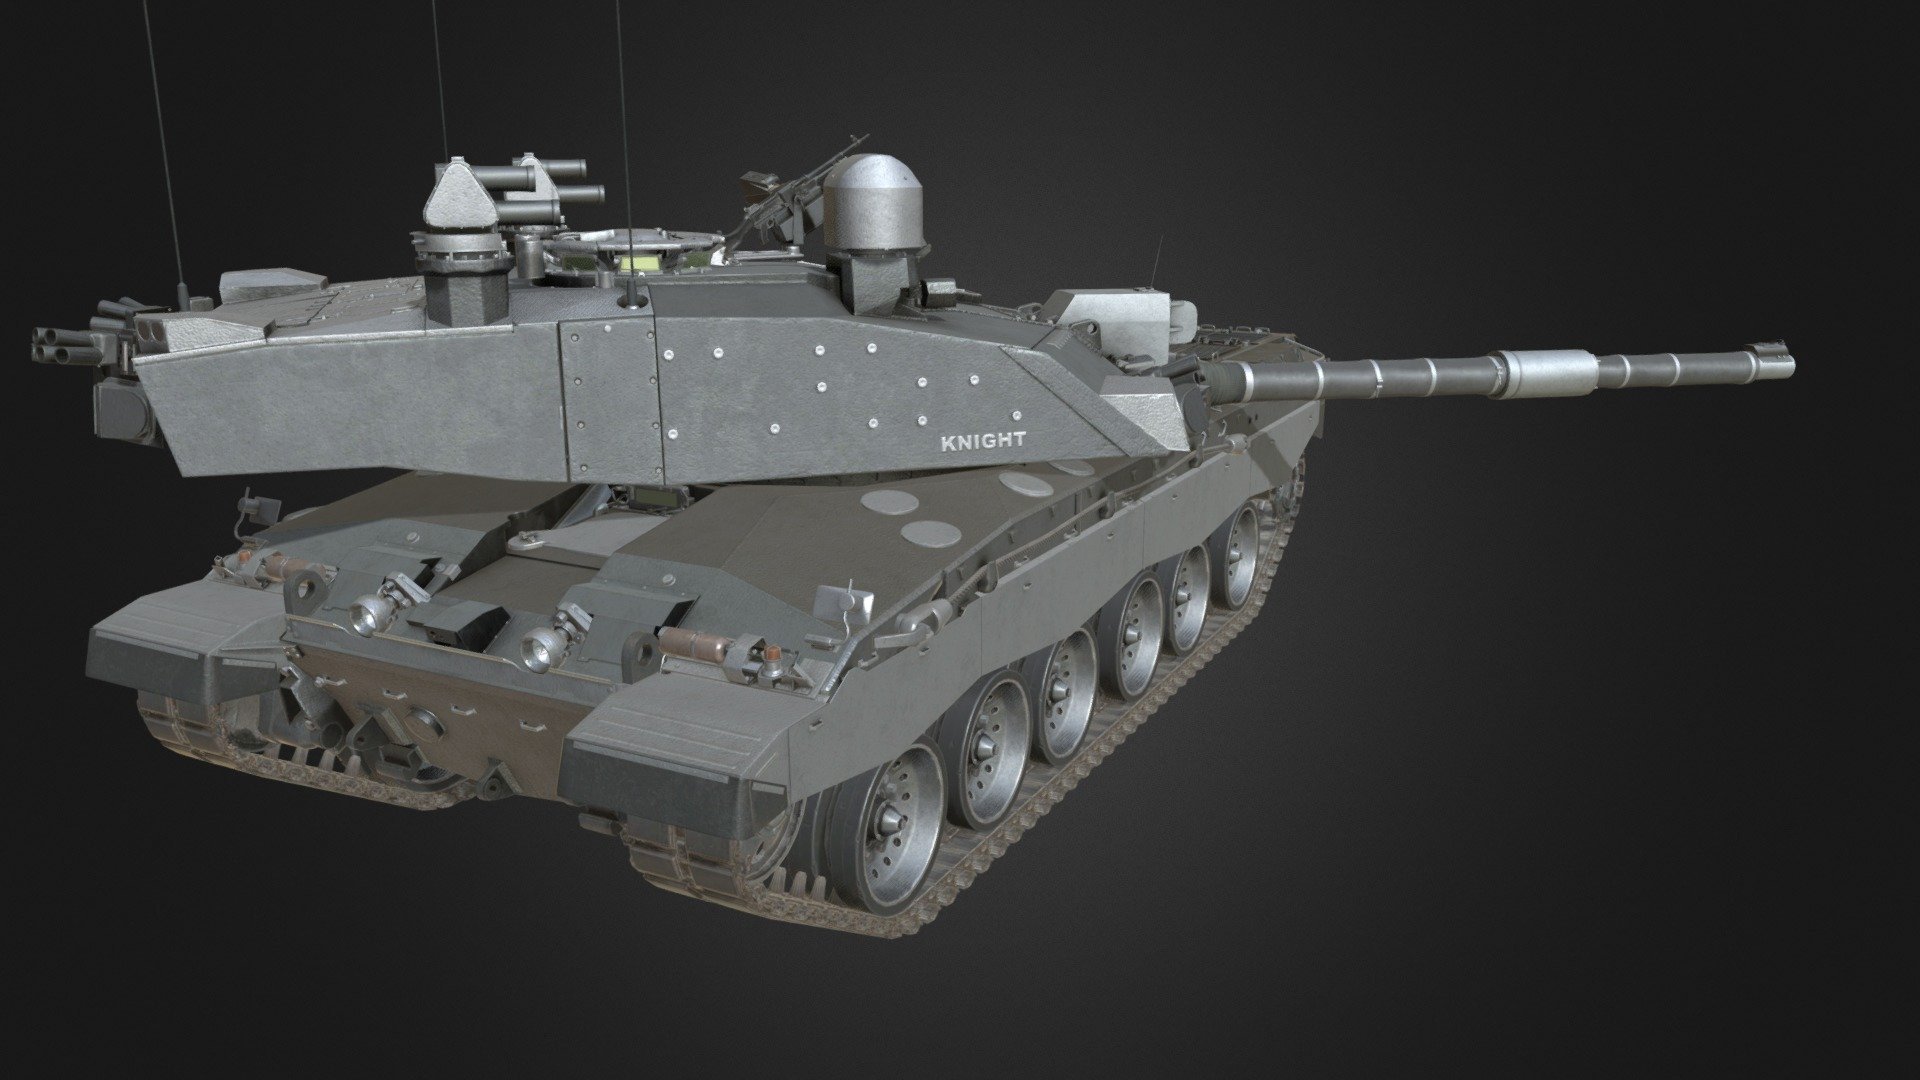 Challenger 2 Black Night KNIGHT - 3D model by leviathan07.ams  (@leviathan07) [f4541ce]